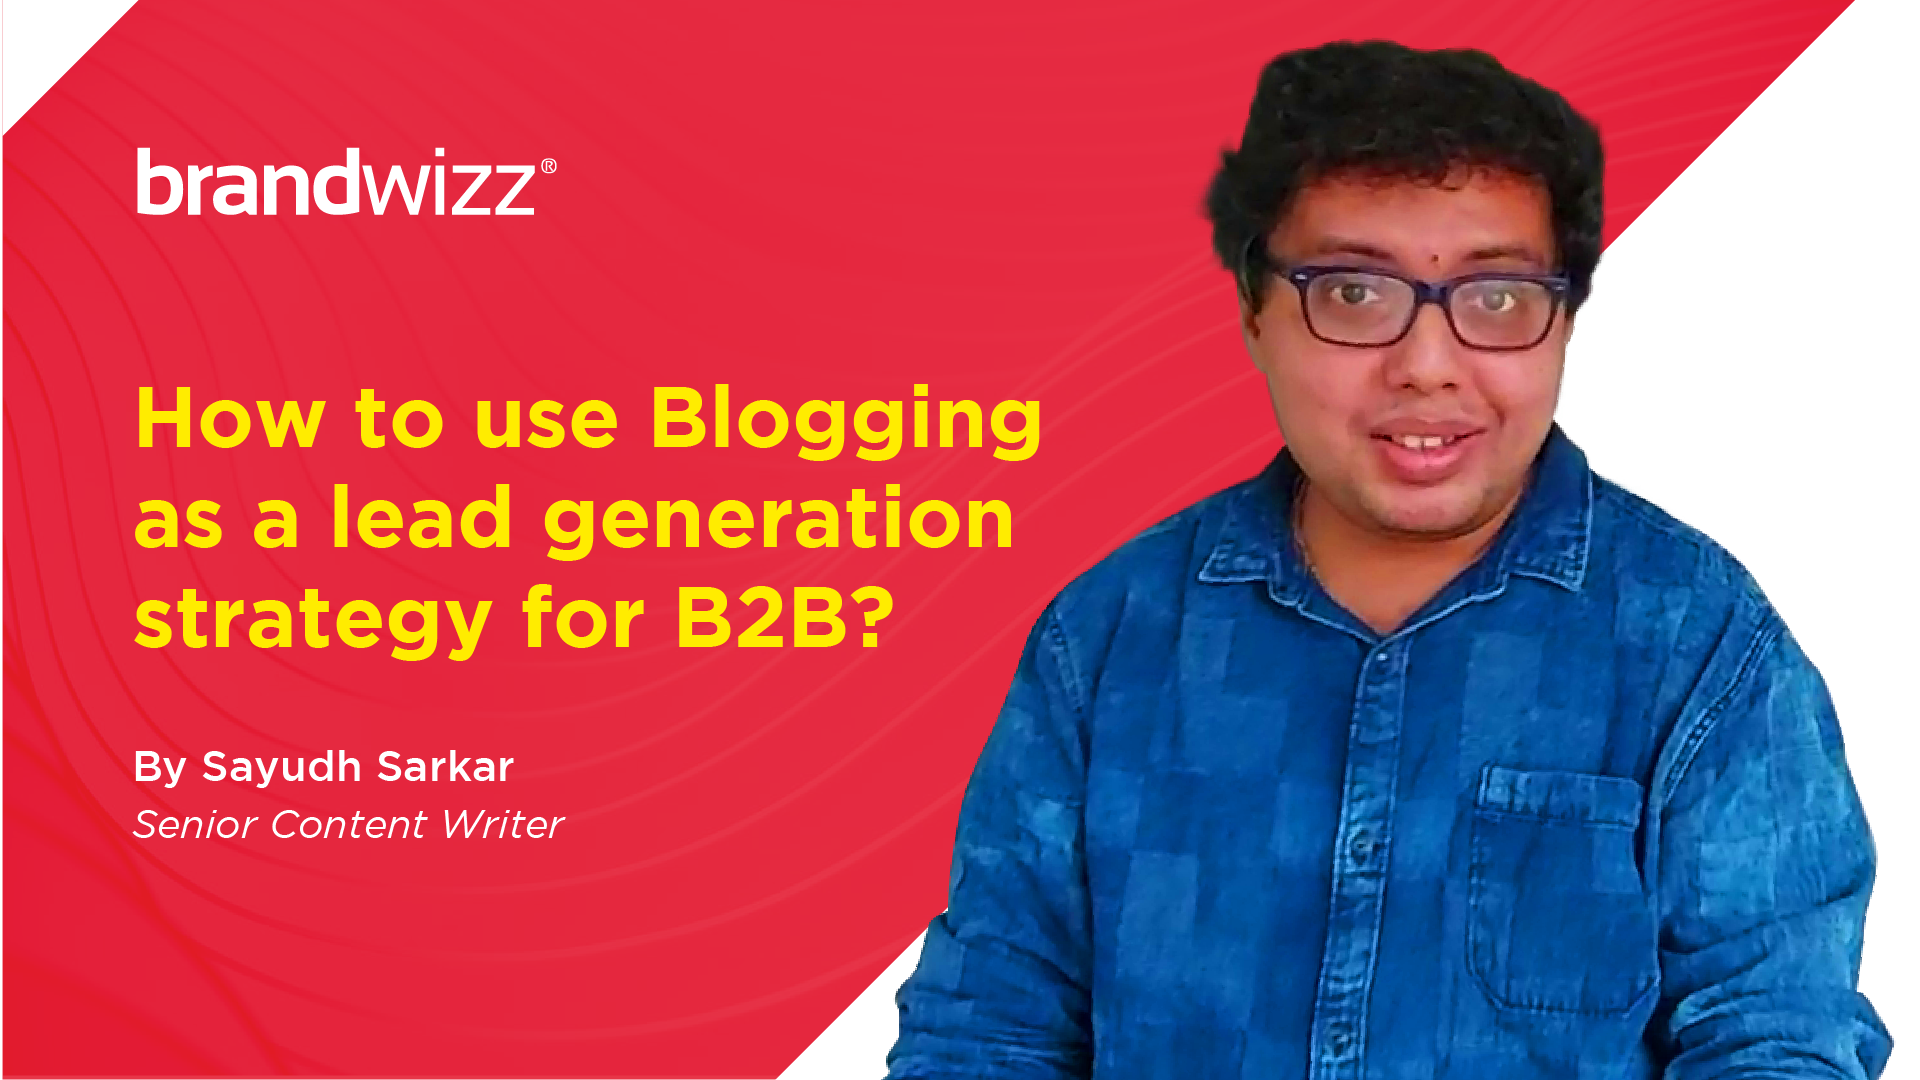 How To Use Blogging As A Lead Generation Strategy For B2B?